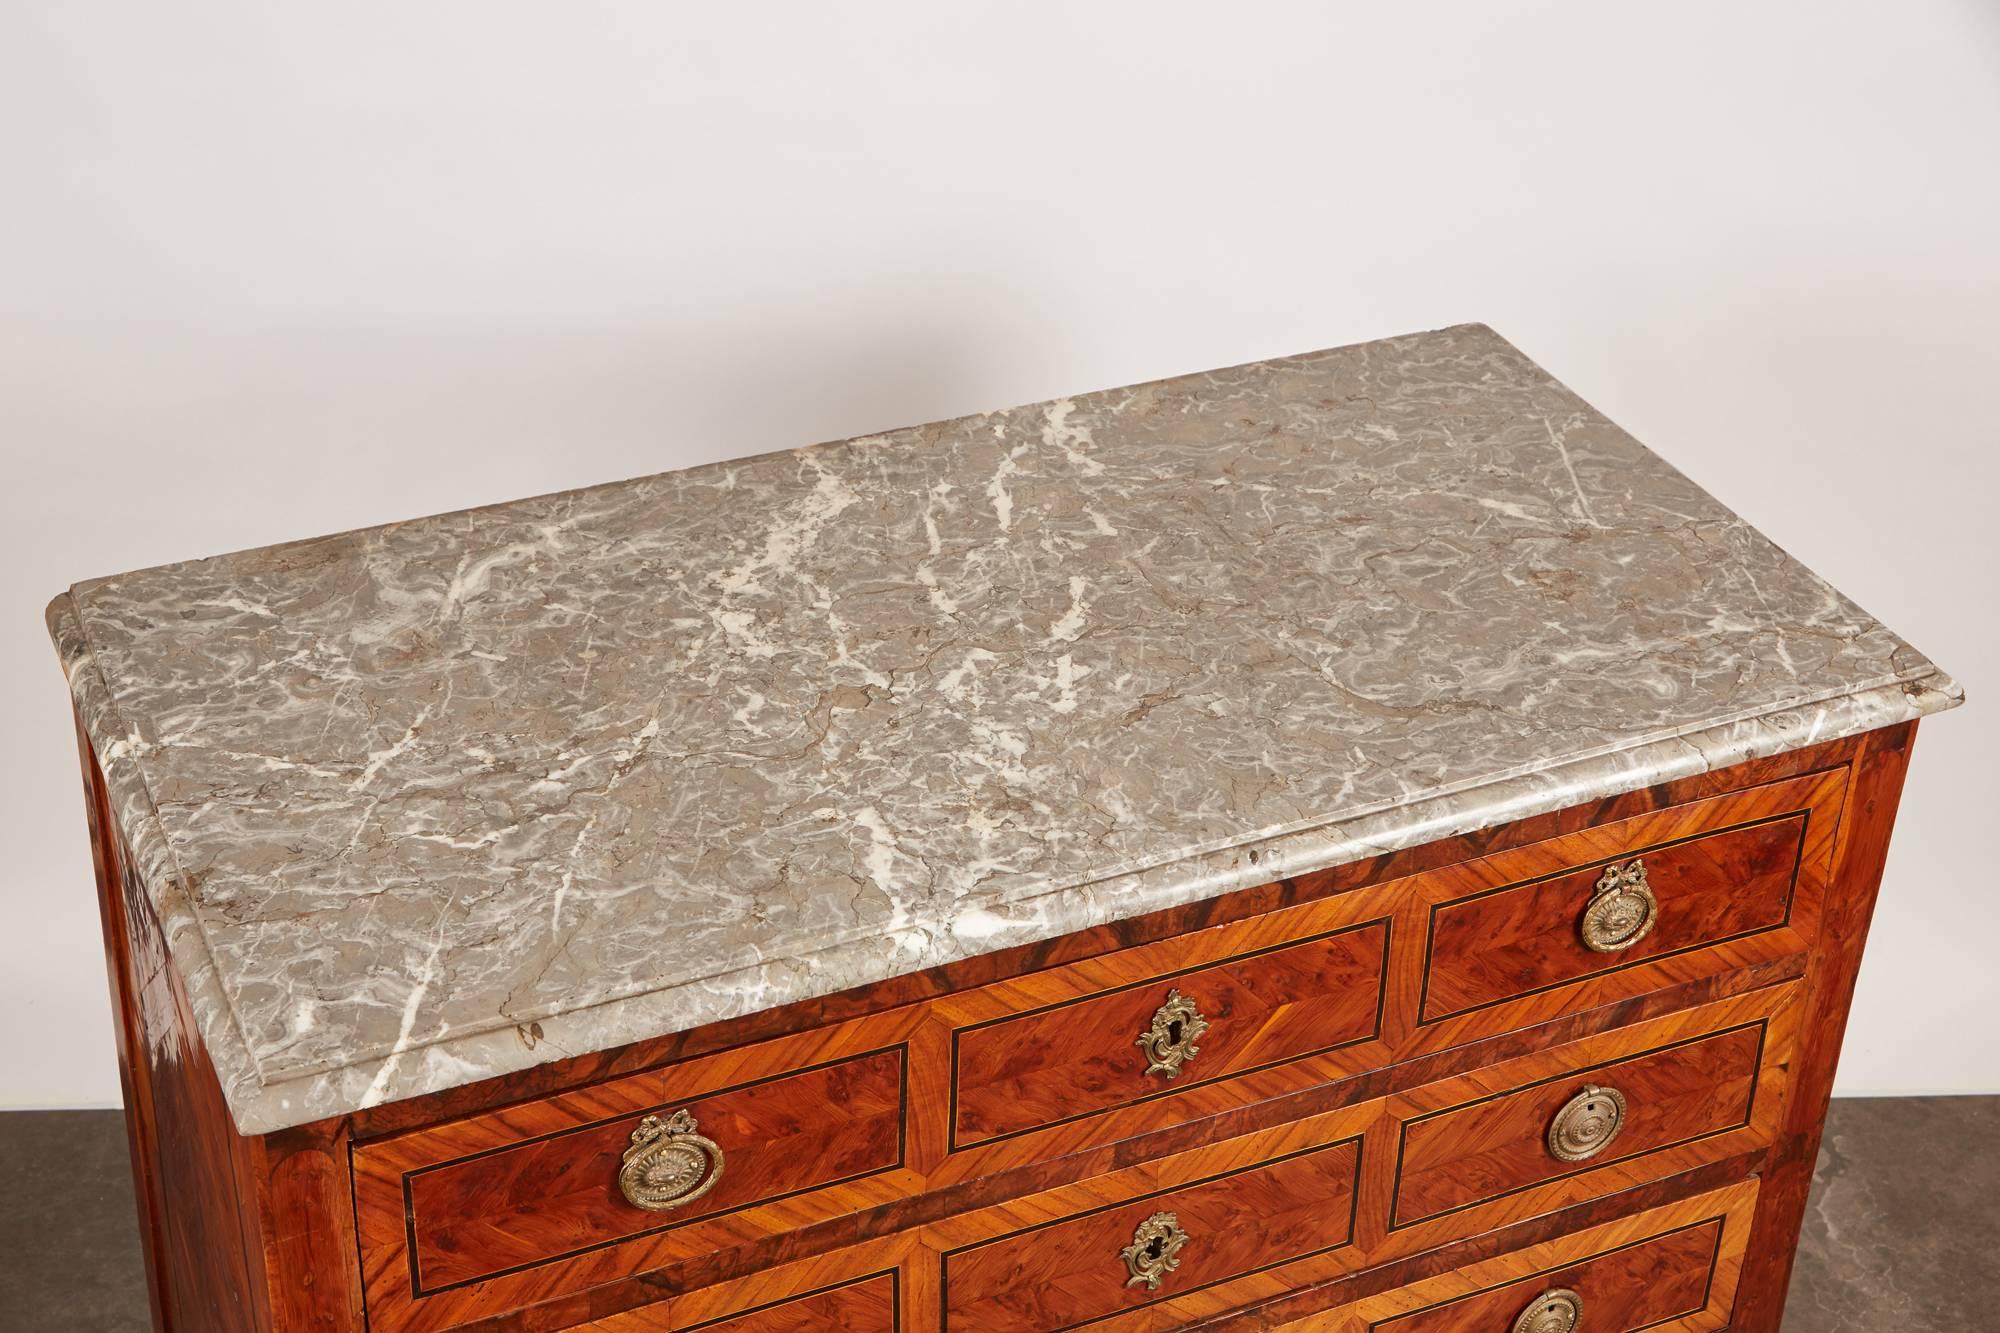 18th Century Italian Neoclassical Inlaid Chest of Drawers with Marble Top For Sale 4